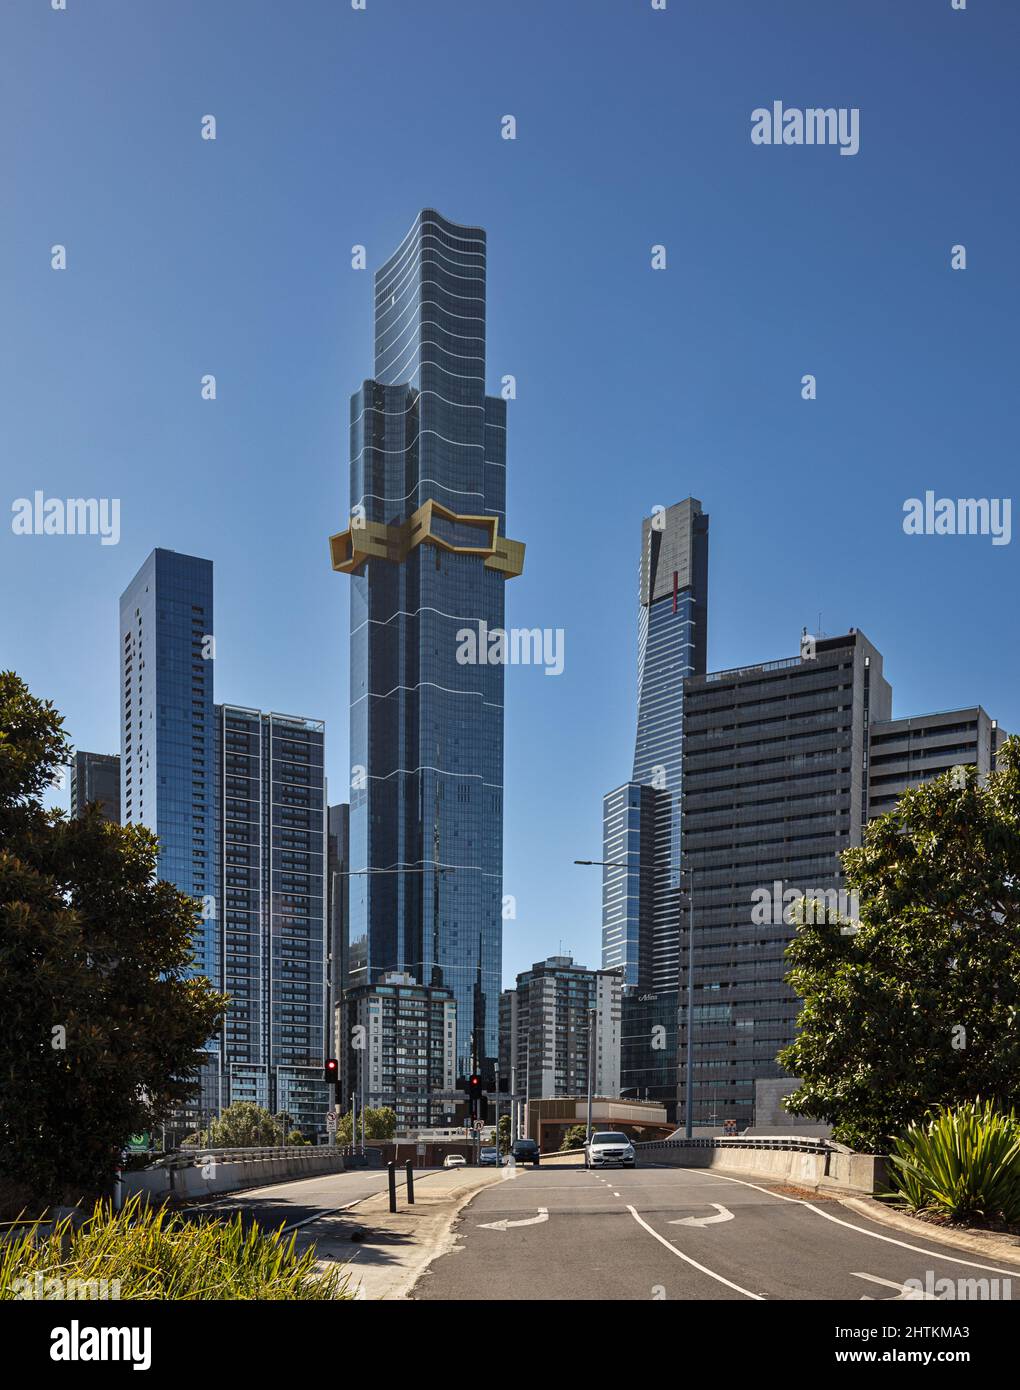 Australia 108, the tallest residential tower in the Southern Hemisphere. Stock Photo